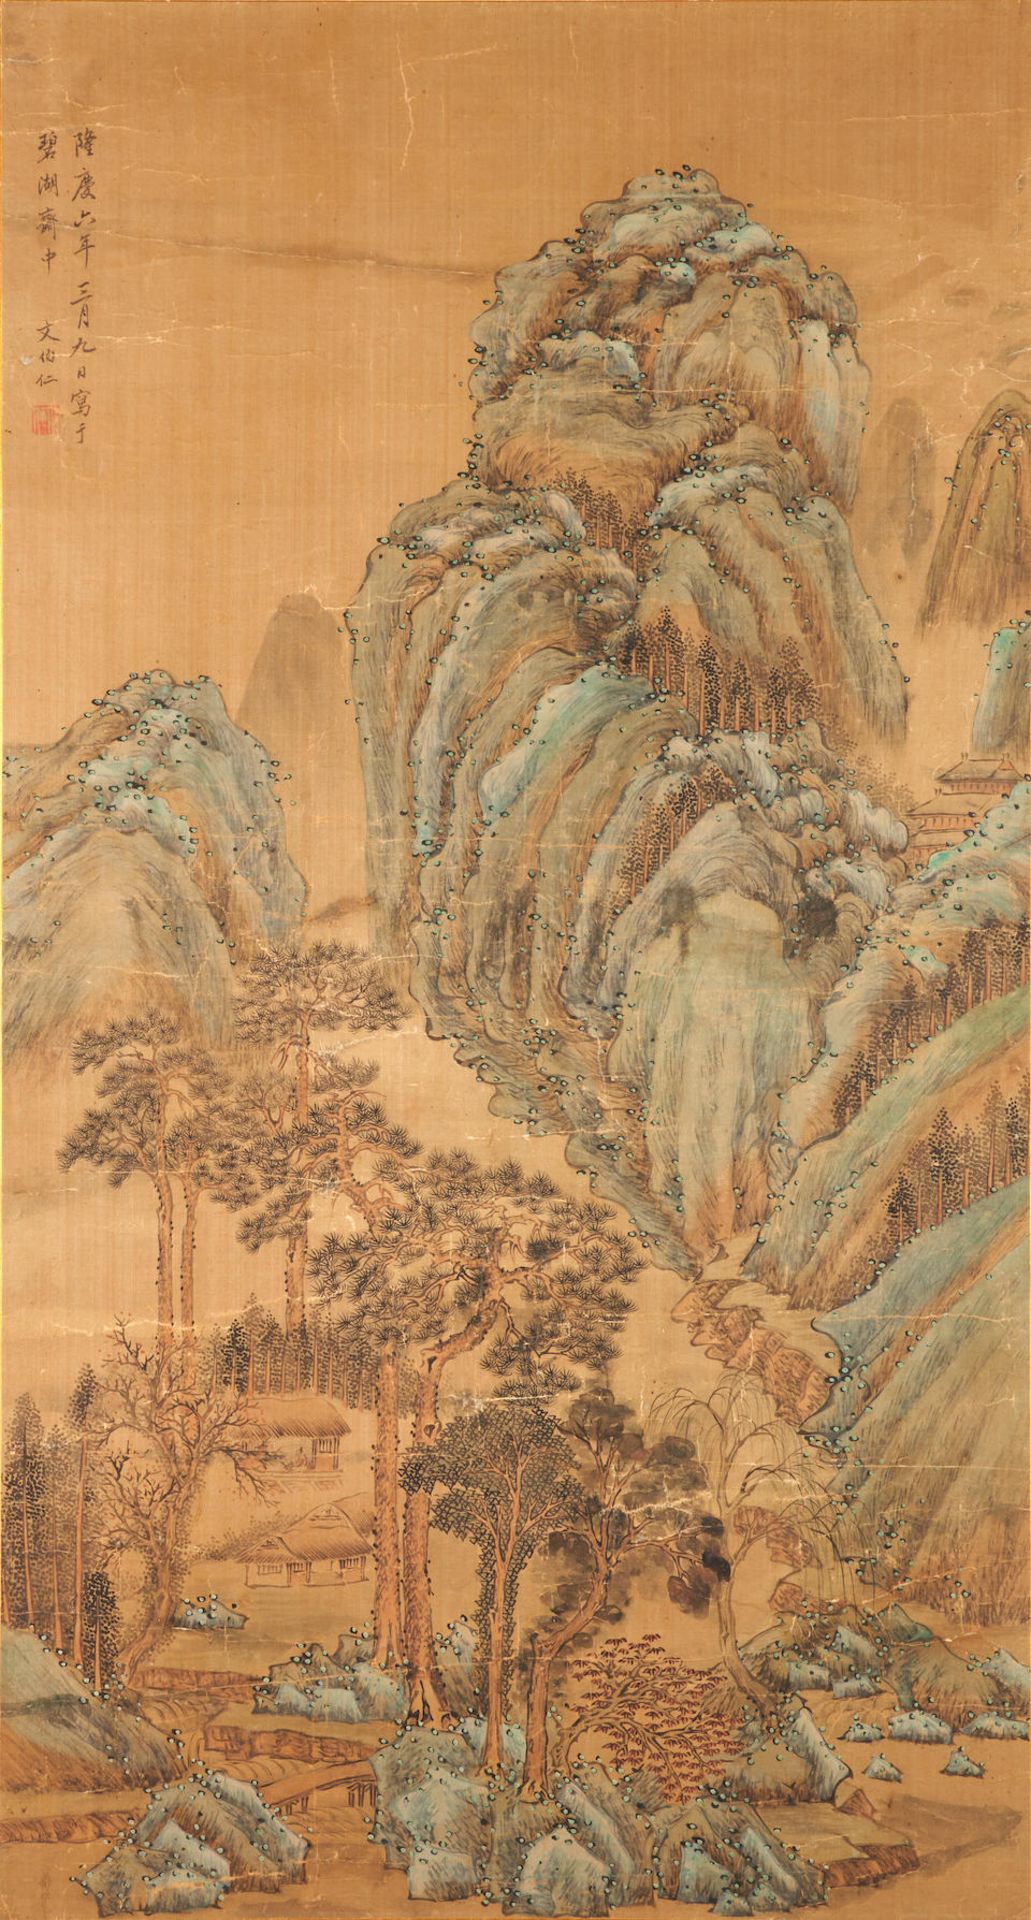 AFTER WEN BOREN (1502-1575) MOUNTAIN-AND-WATER LANDSCAPE